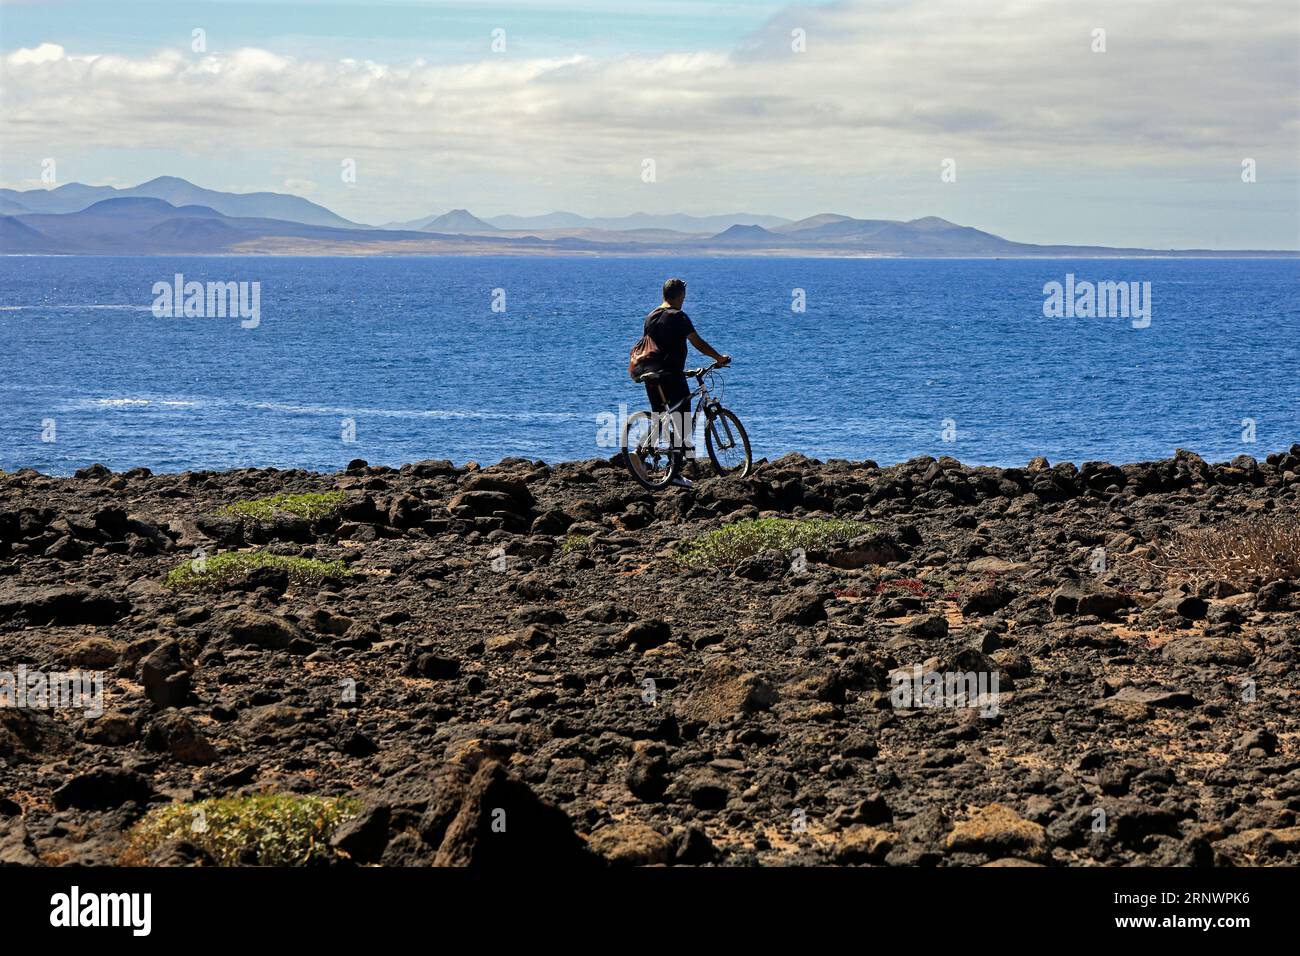 Man on a bicycle looks across towards Fuerteventura on the horizon from Faros area of Lanzarote, Canary Islands, Spain Stock Photo